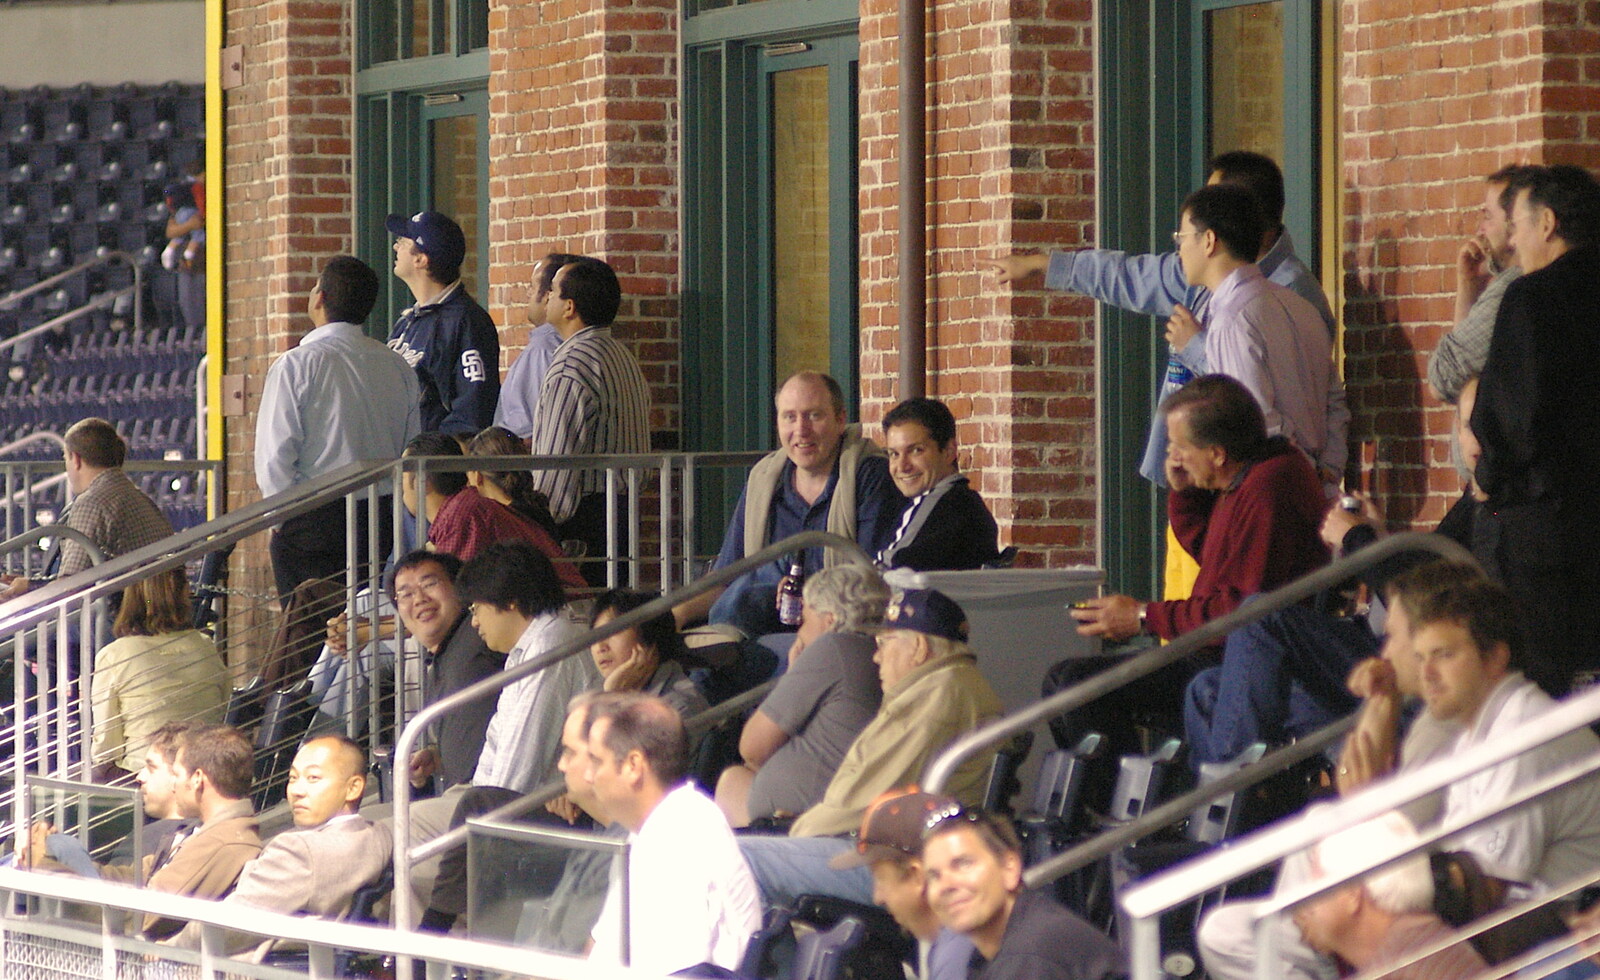 Russell McHugh entertains a customer from The Padres at Petco Park: a Baseball Game, San Diego, California - 31st May 2005